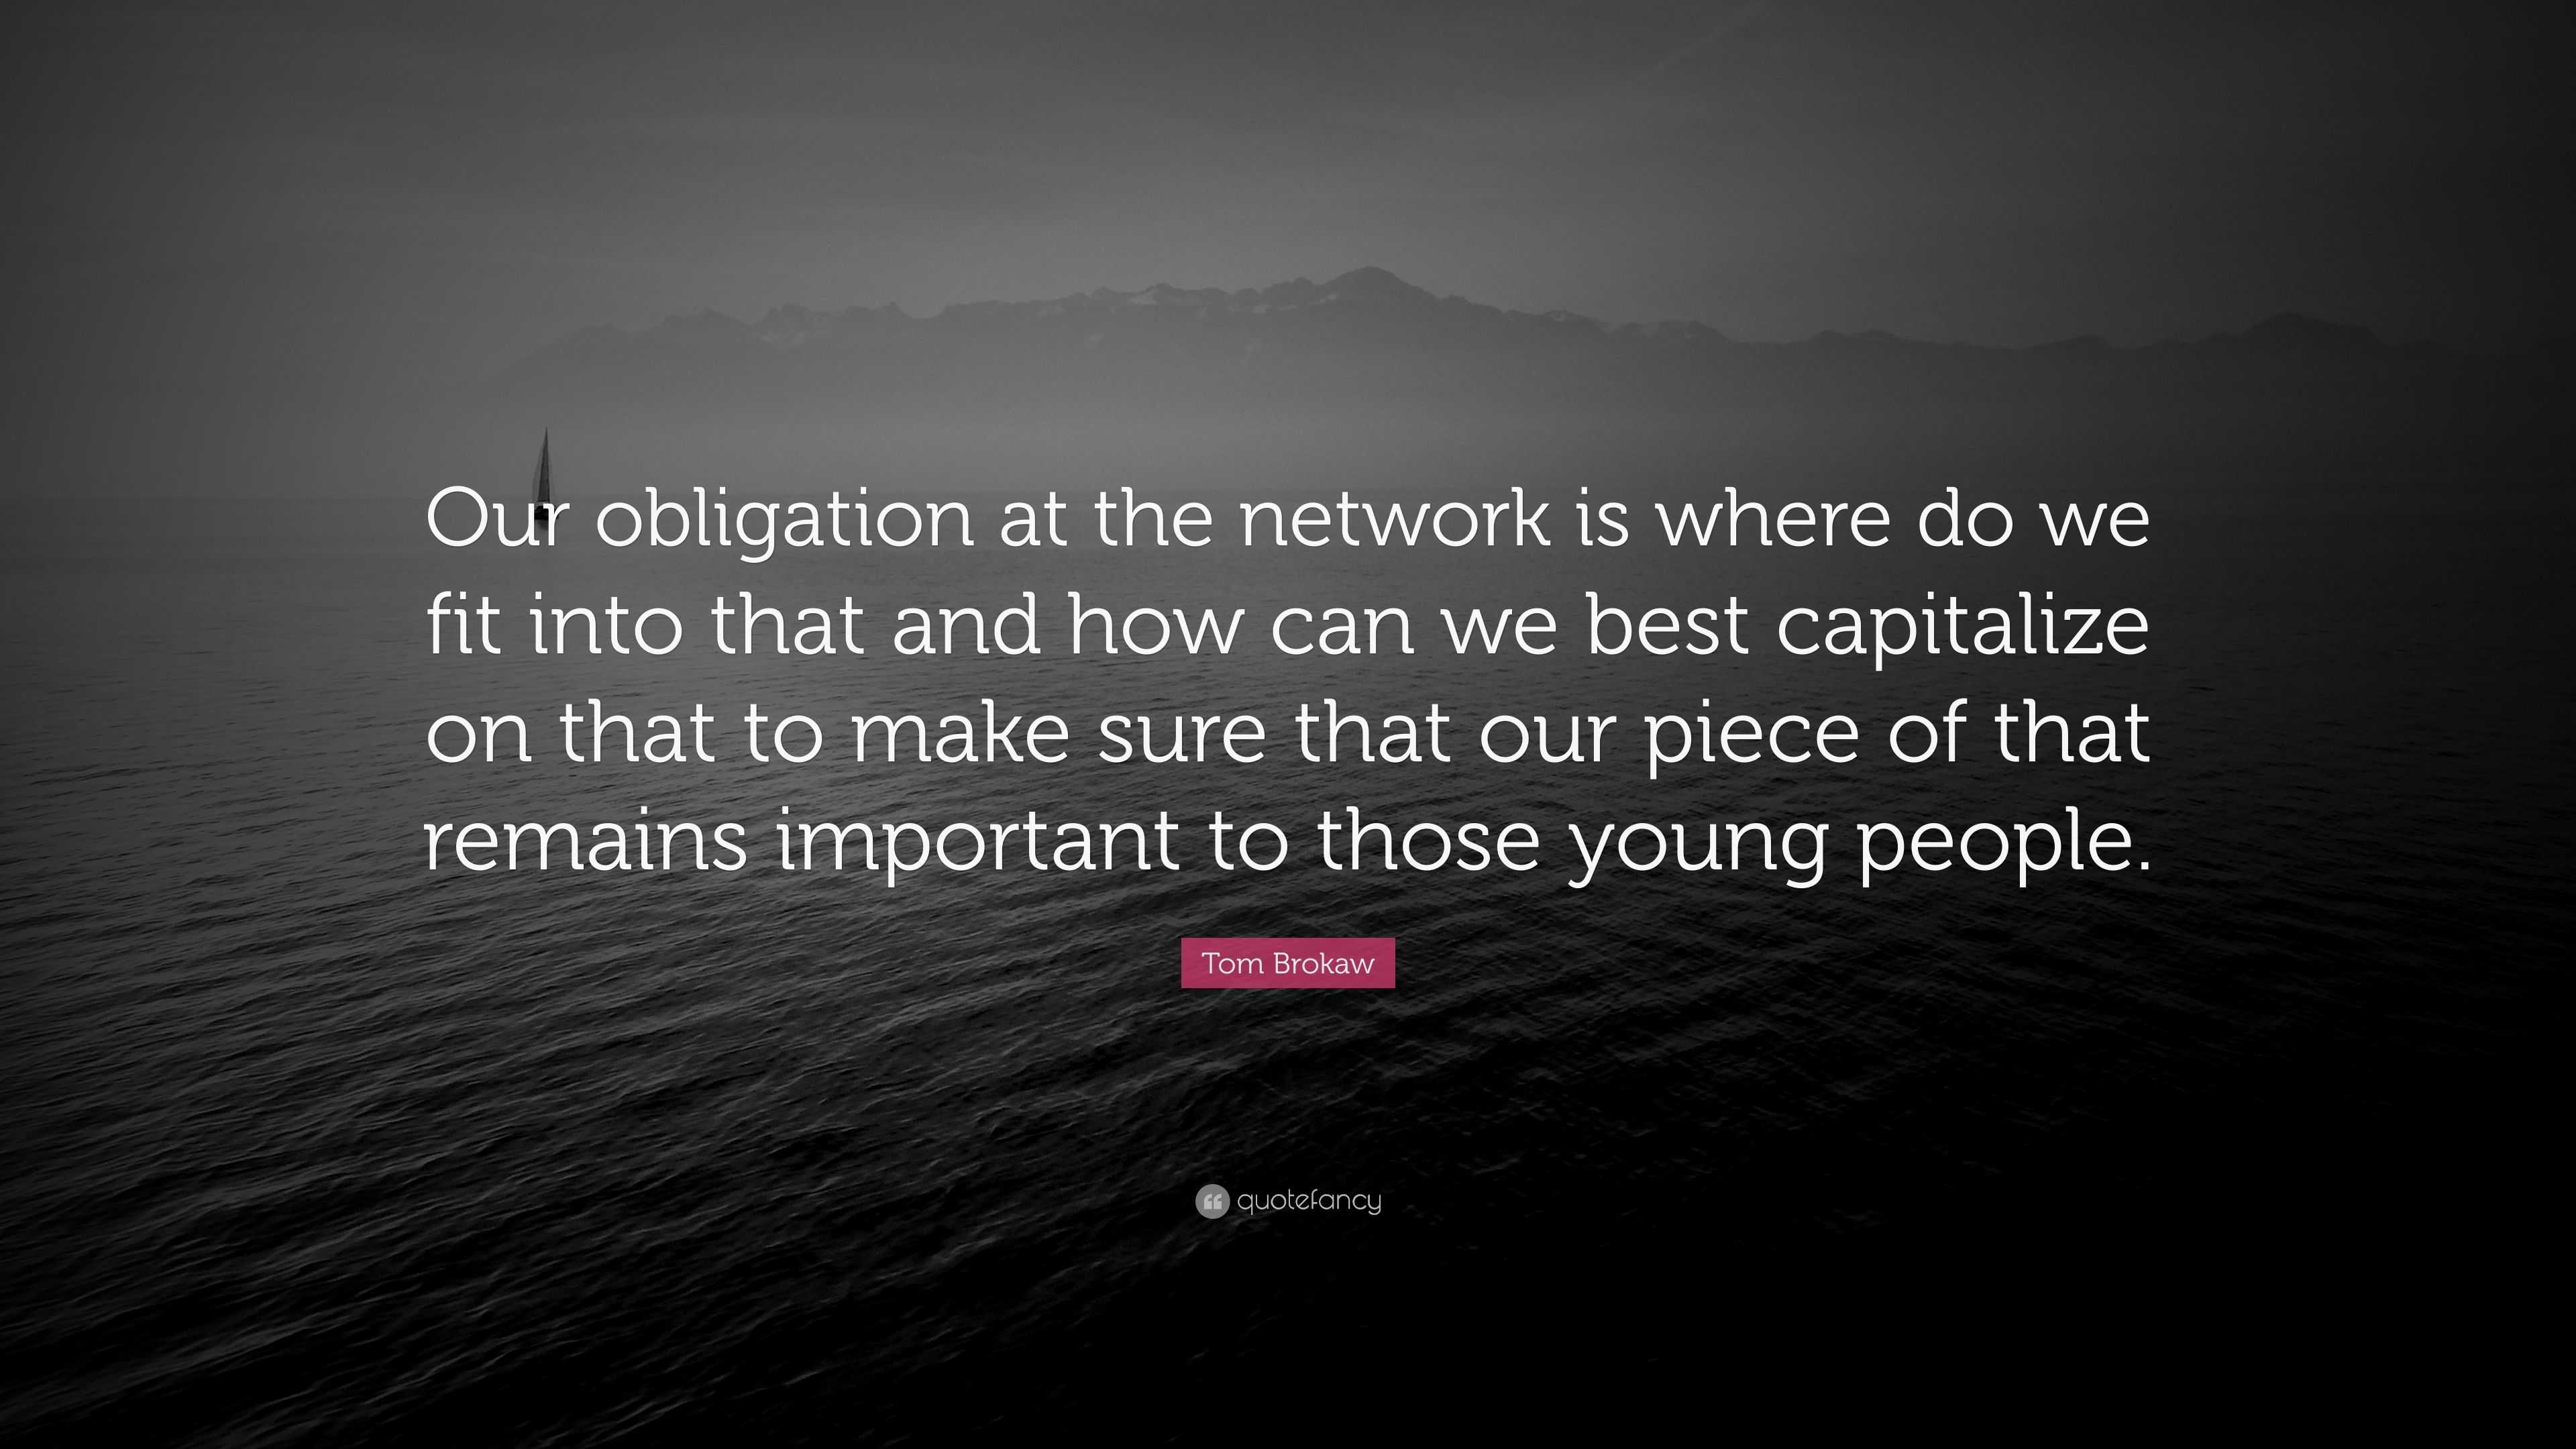 Tom Brokaw Quote: "Our obligation at the network is where do we fit into that and how can we ...